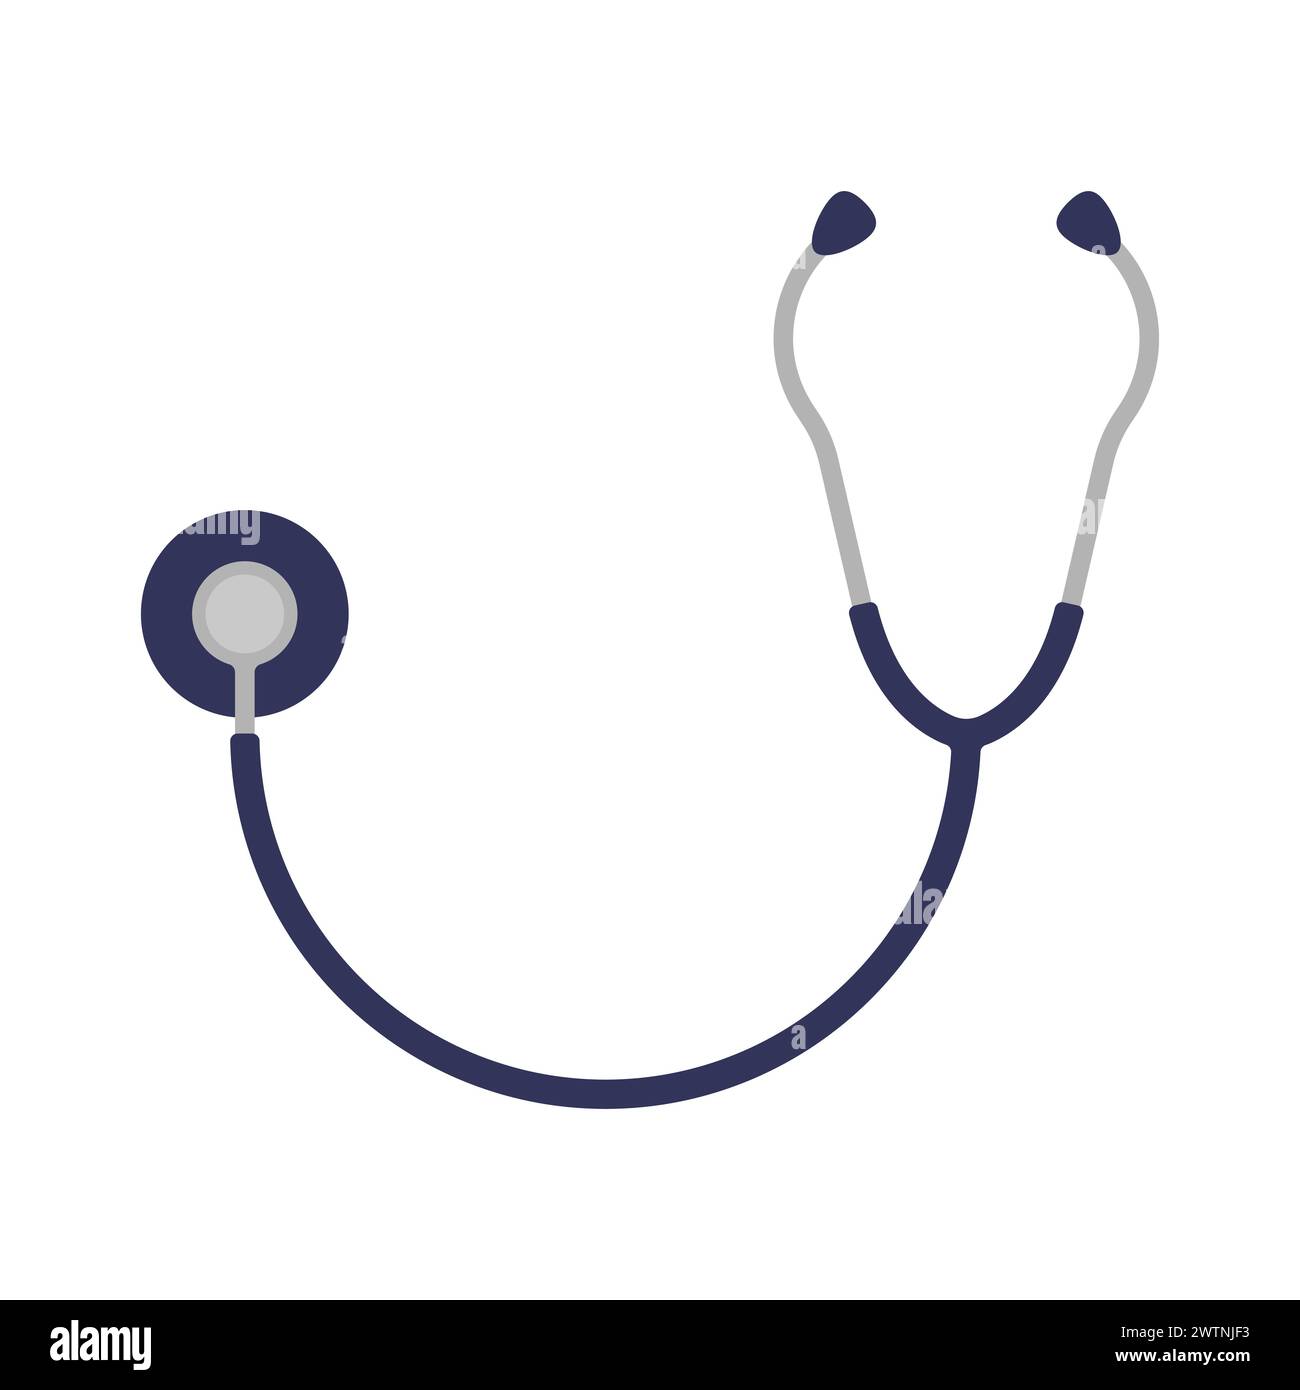 Stethoscope Vector Illustration Doctor Stethoscope Icon Medical Stethoscope Illustration Health Care Produce Stock Vector